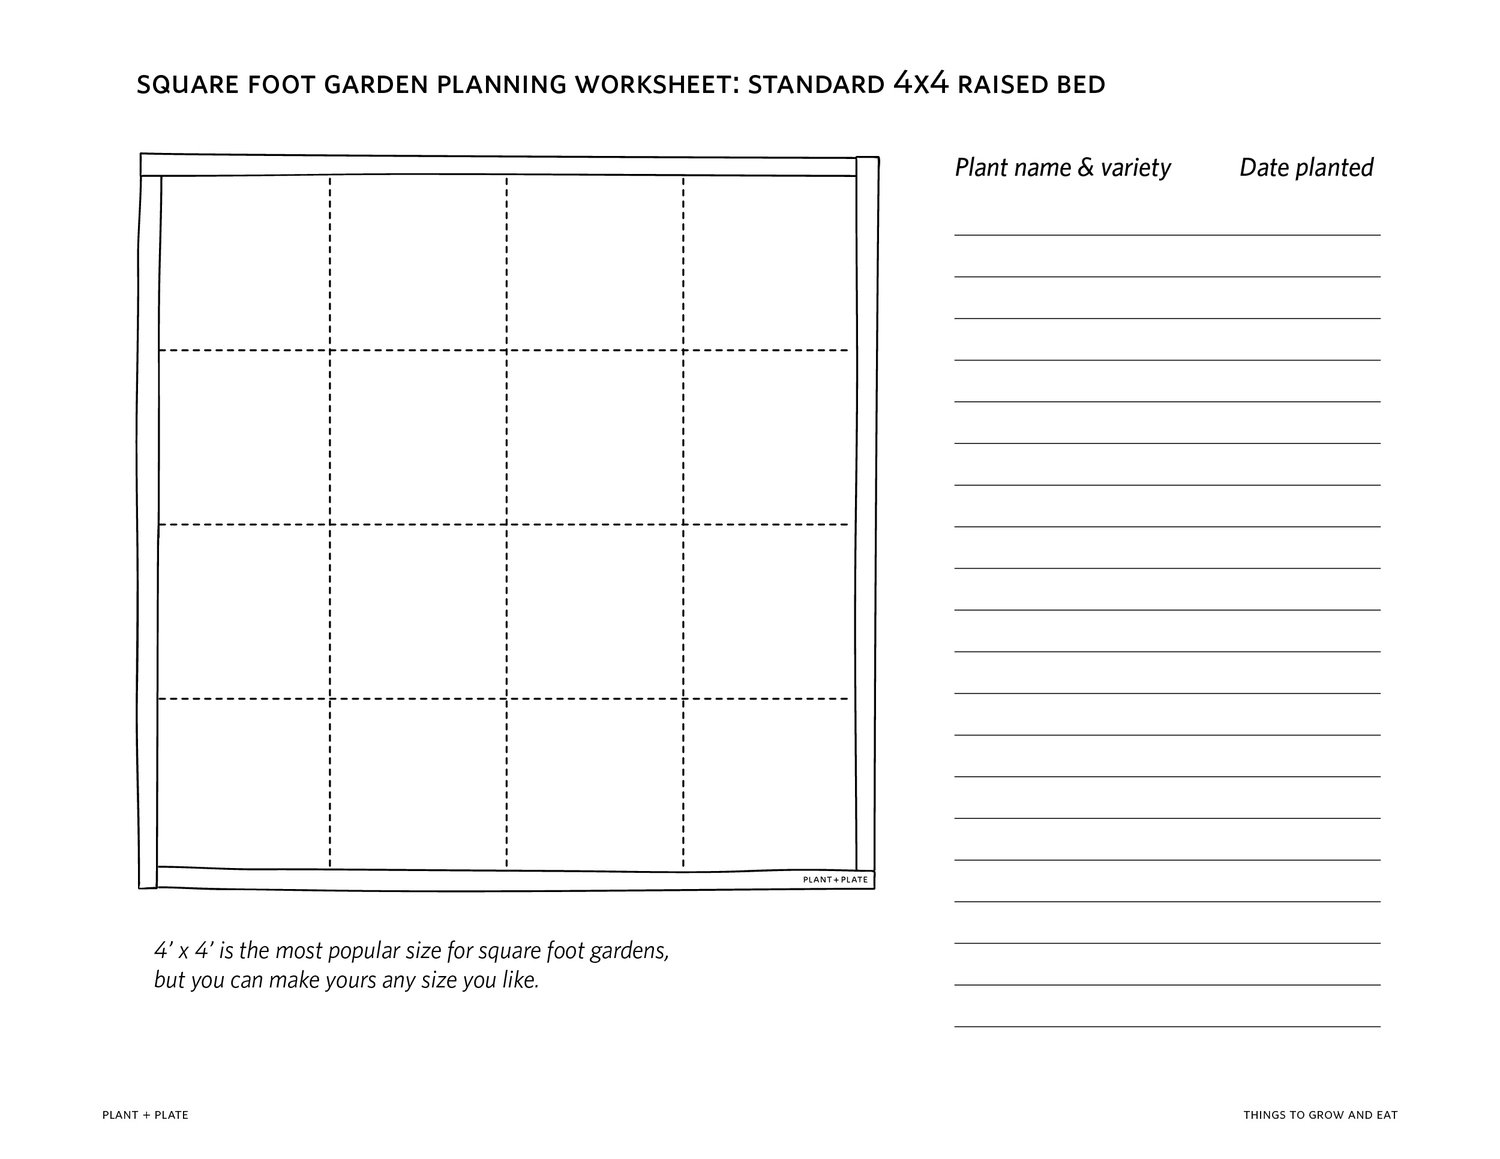 Square foot garden planner plant and plate